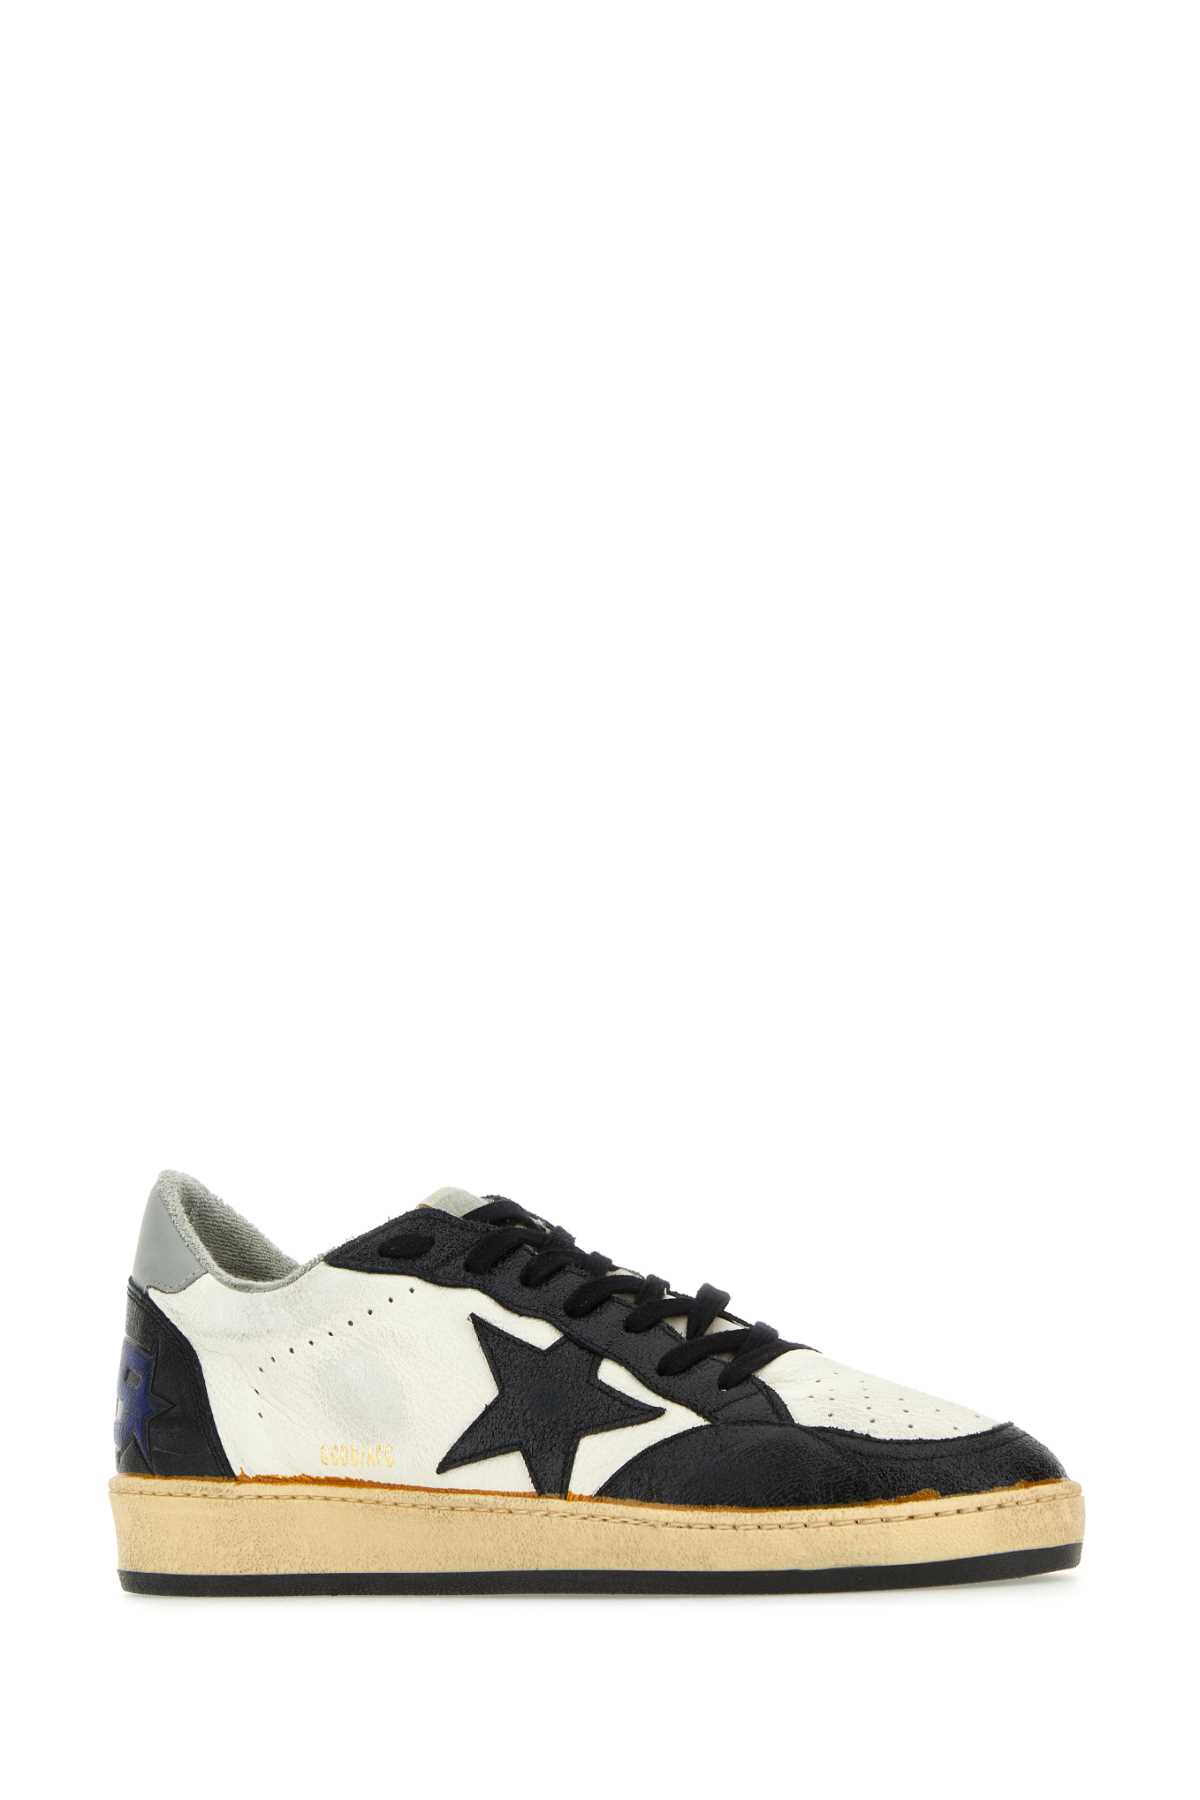 GOLDEN GOOSE MULTIcolour LEATHER BALL STAR trainers